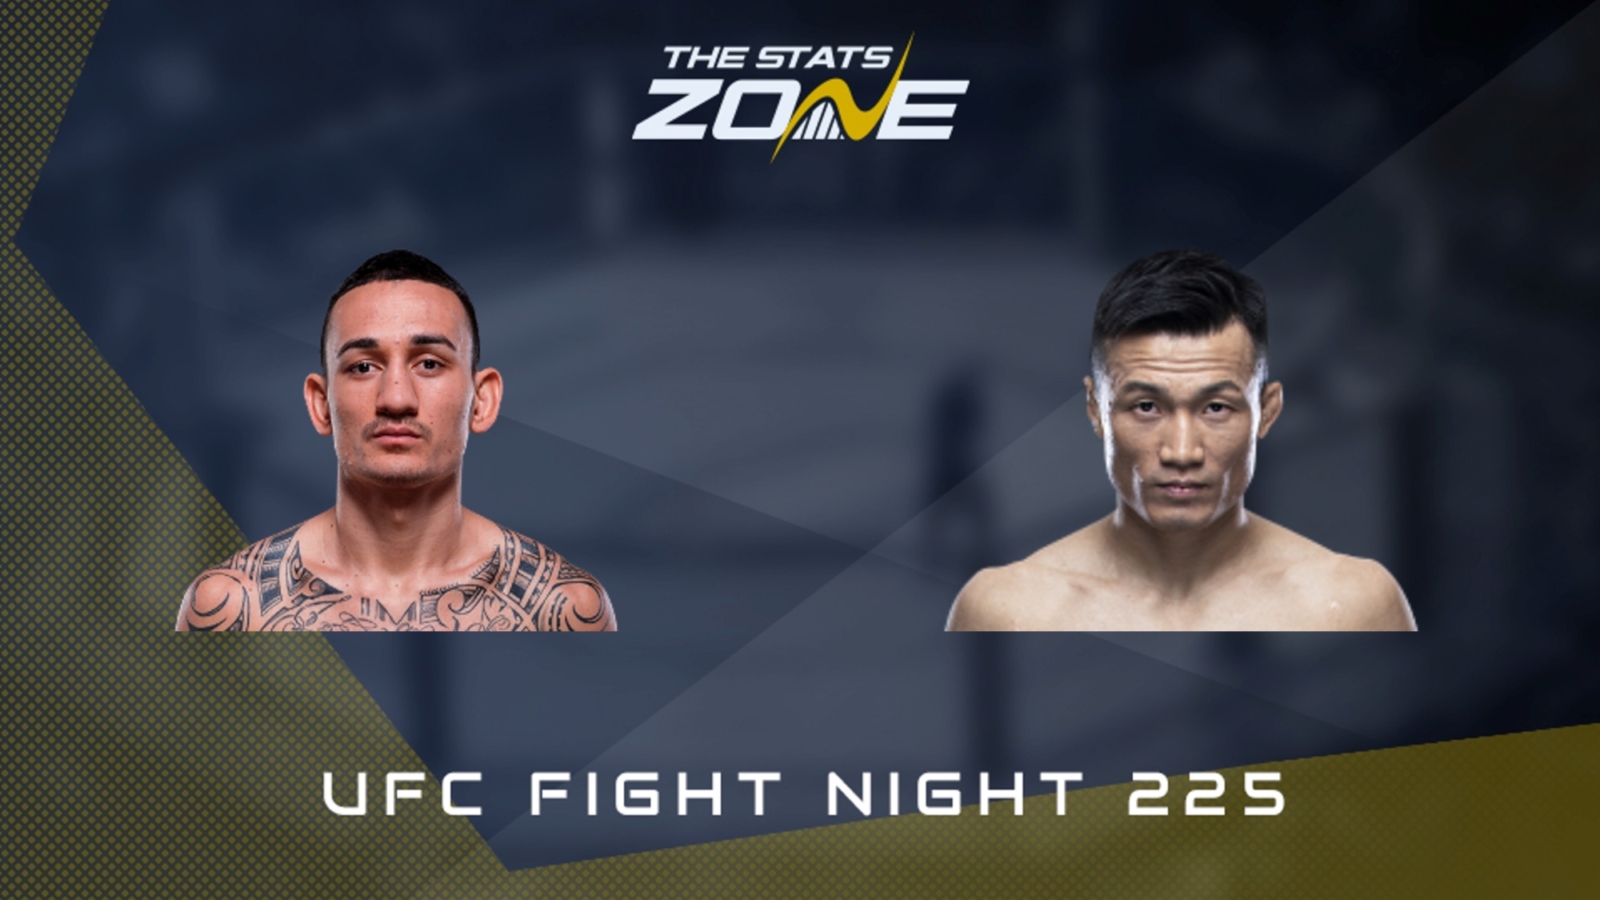 Max Holloway vs Jung Chan-sung start time, undercard, TV channel and streaming info for UFC Fight Night 225